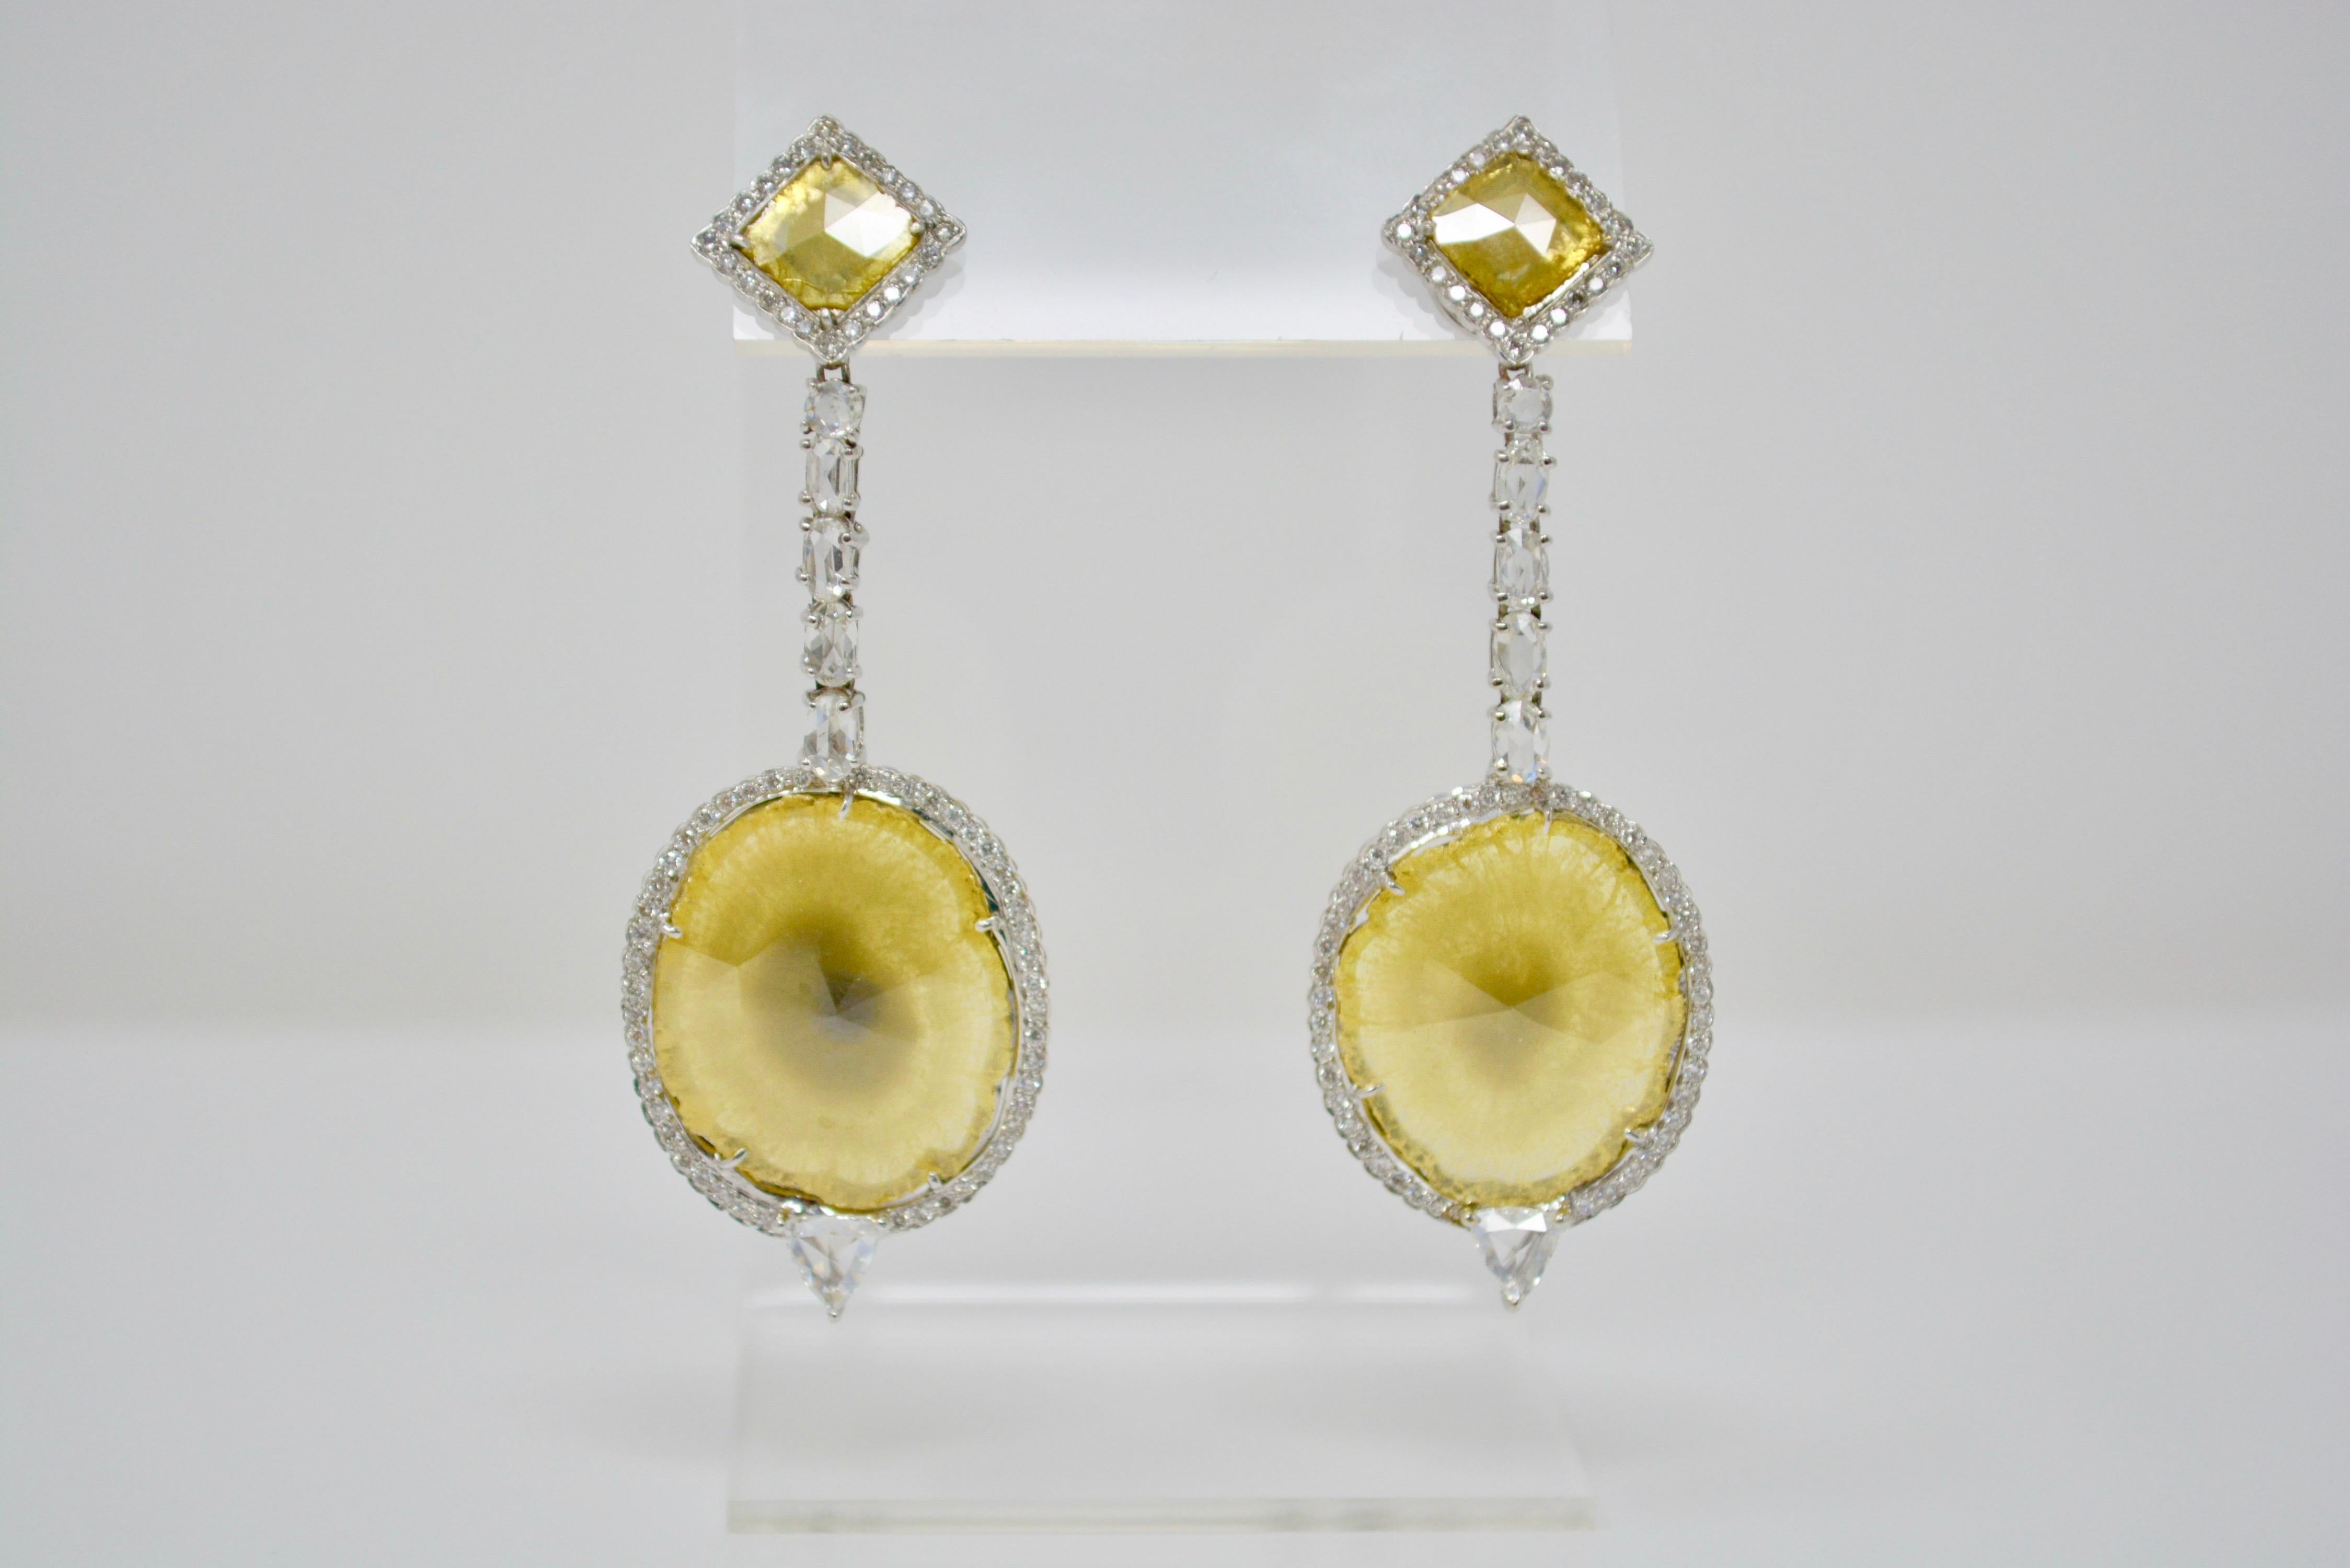 Oval Cut 18.09 Carat Natural Yellow Slice Diamond and White Diamond Earrings For Sale